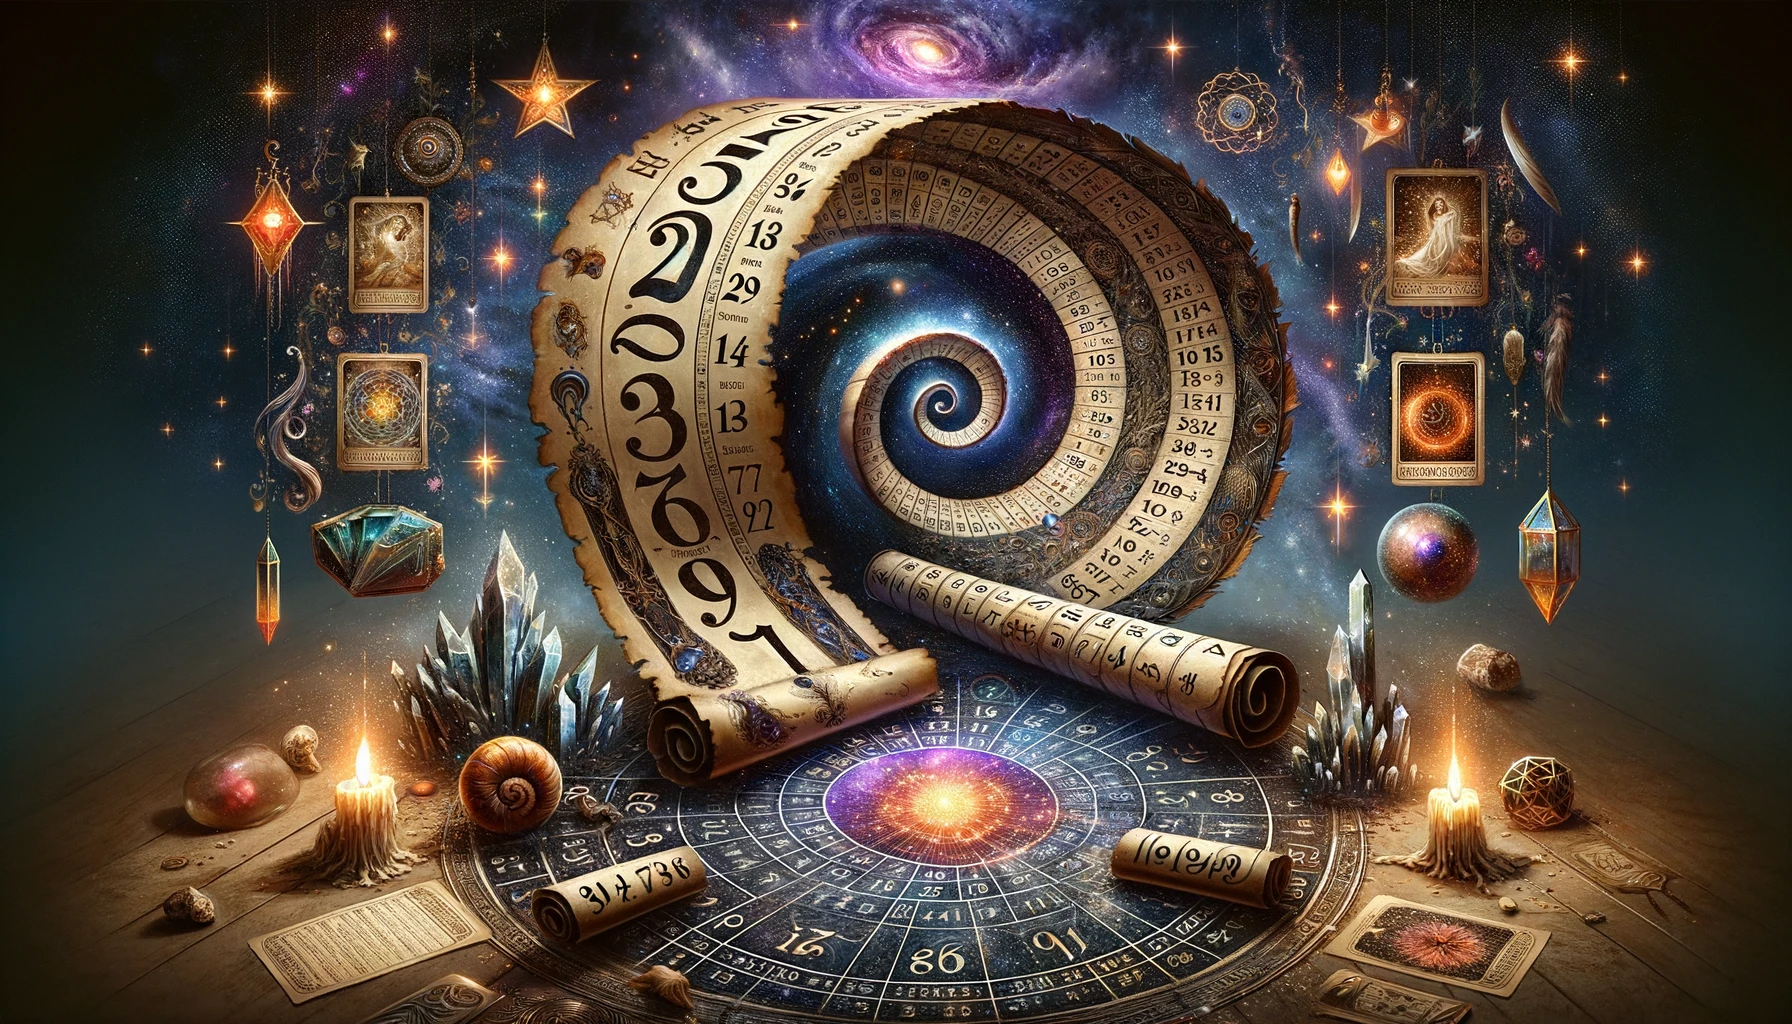 ·E 2023 12 13 06.08.10   A mystical and enchanting image representing the concept of a Personal Year in numerology. The scene depicts a cosmic backdrop with stars and celestia.png